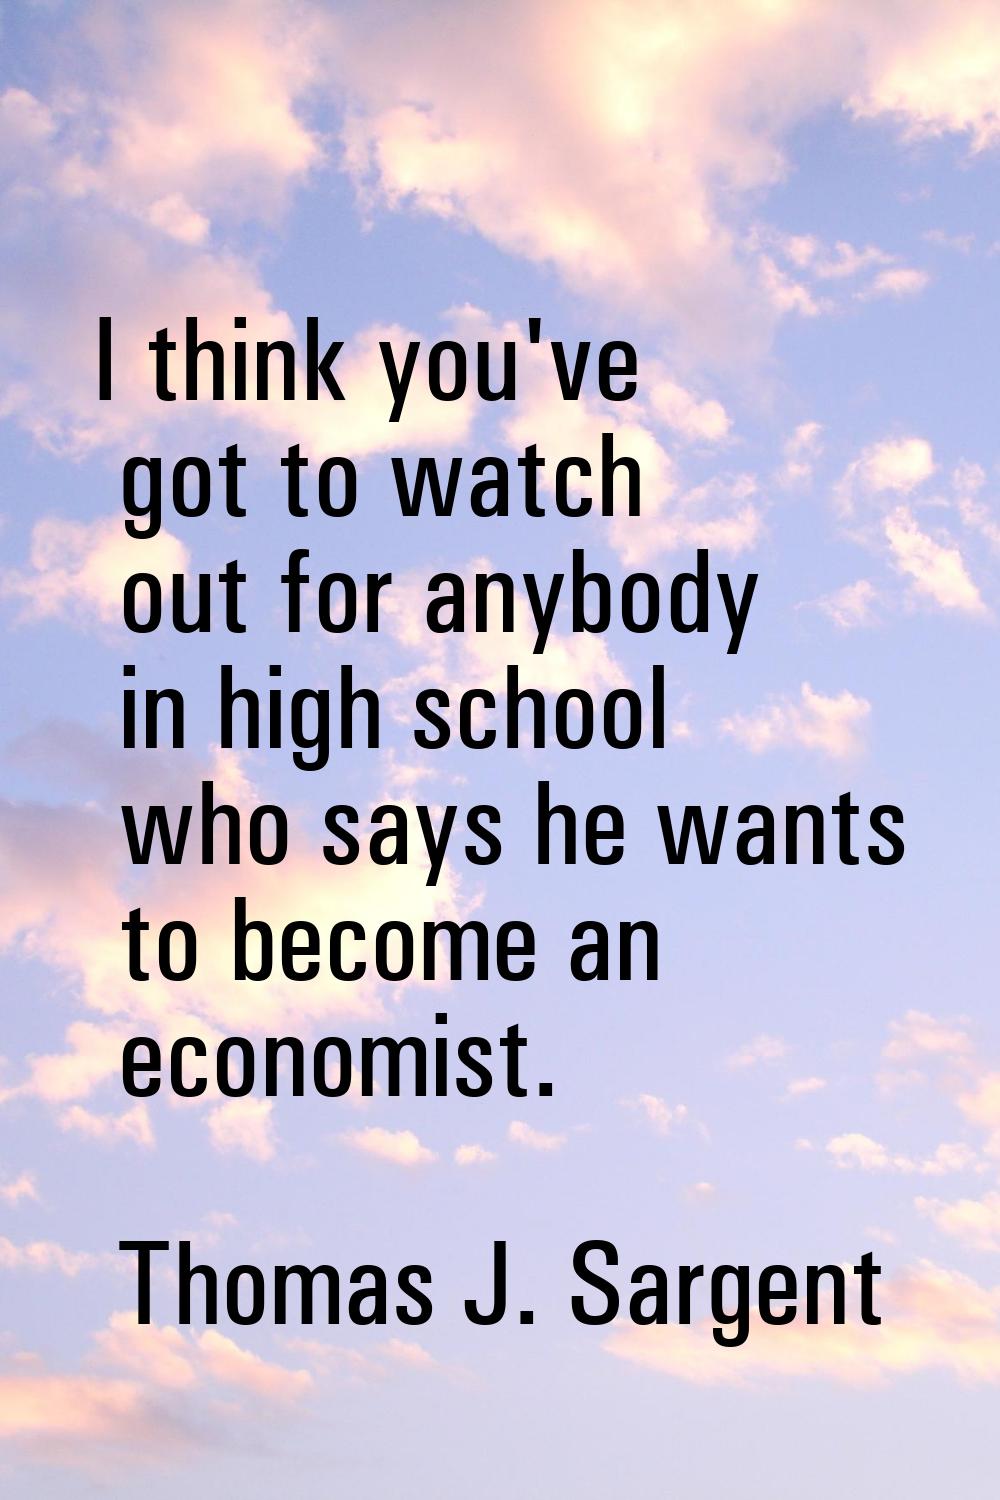 I think you've got to watch out for anybody in high school who says he wants to become an economist